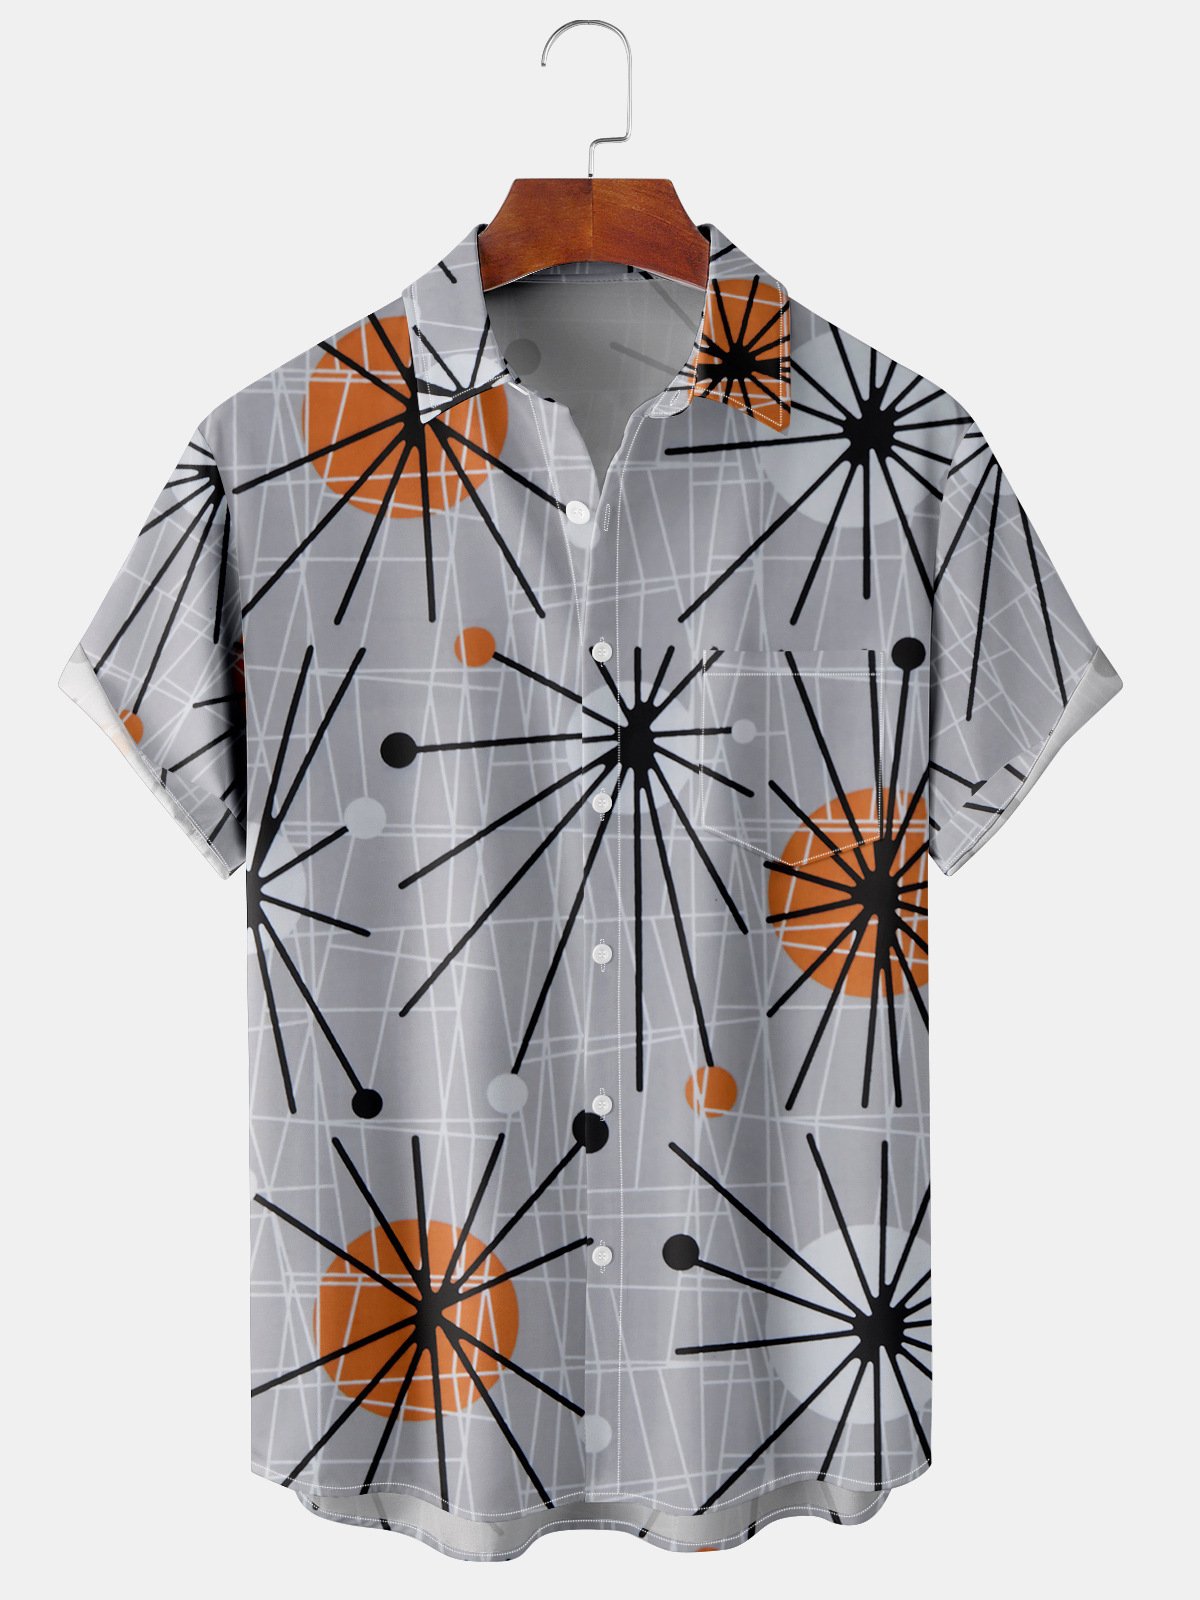 Mens Retro50s Geo Print Front Buttons Soft Breathable Chest Pocket Casual Hawaiian Shirts